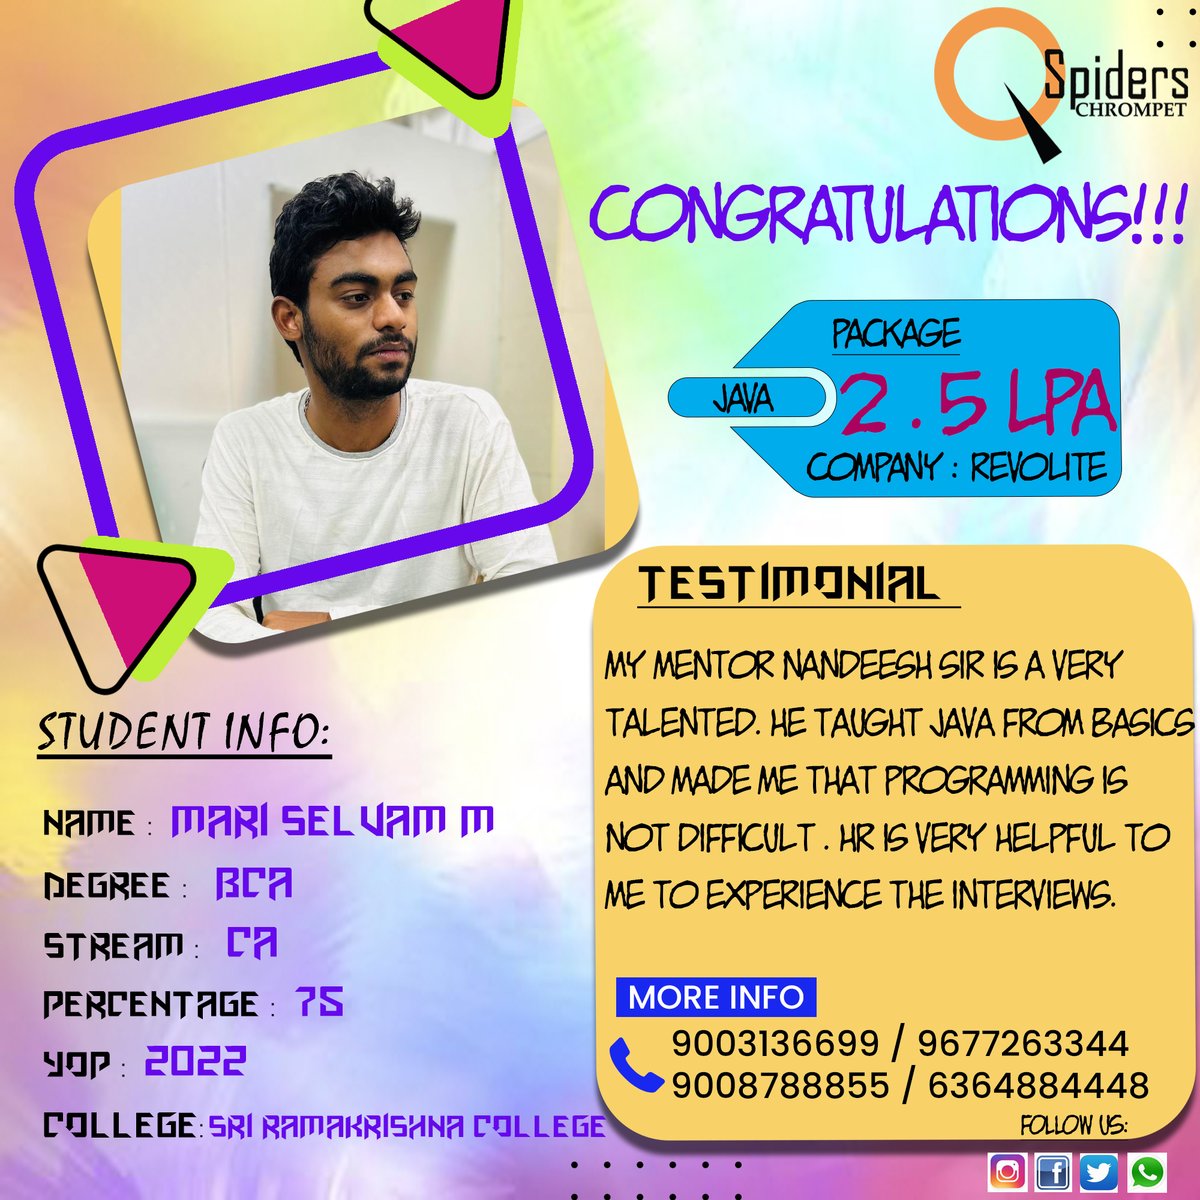 Congratulations Mr. Mariselvam M for getting placed as a Junior Software Developer from Qspiders_Chrompet 💐💐💐.

”QSpiders is a place where businesses find talent and dreams take flight.'
.❤️💯

#successfullyplaced #testimonial #hired #success #placedstudents #successstories